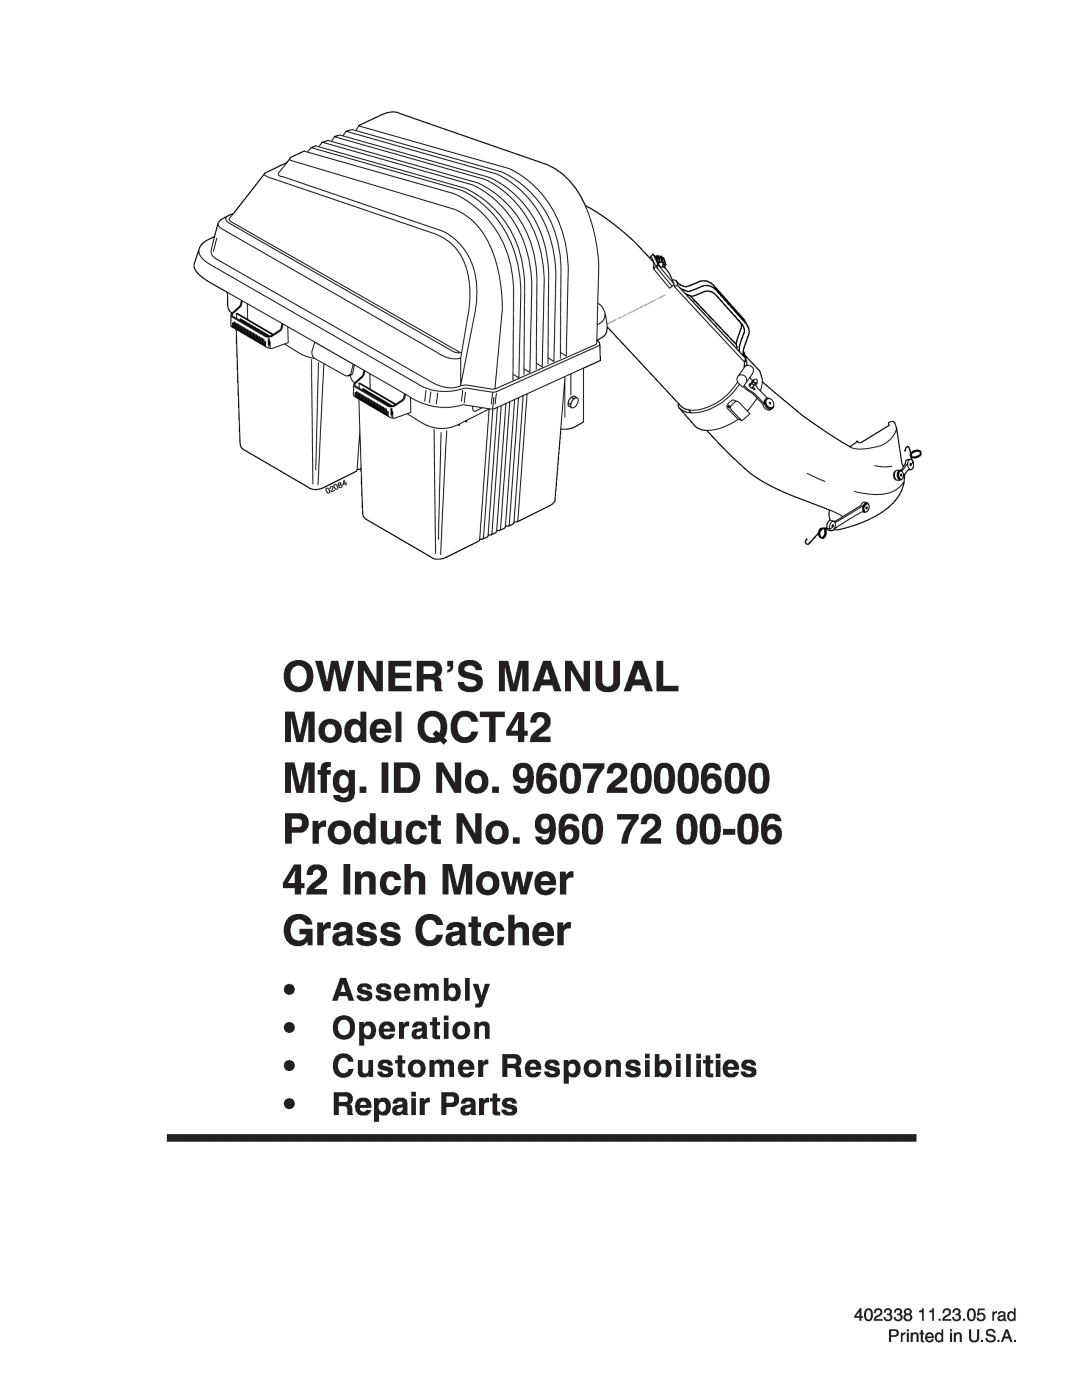 Poulan 402338 owner manual OWNER’S MANUAL Model QCT42 Mfg. ID No, Product No. 960 72 42 Inch Mower Grass Catcher, NIN e m 